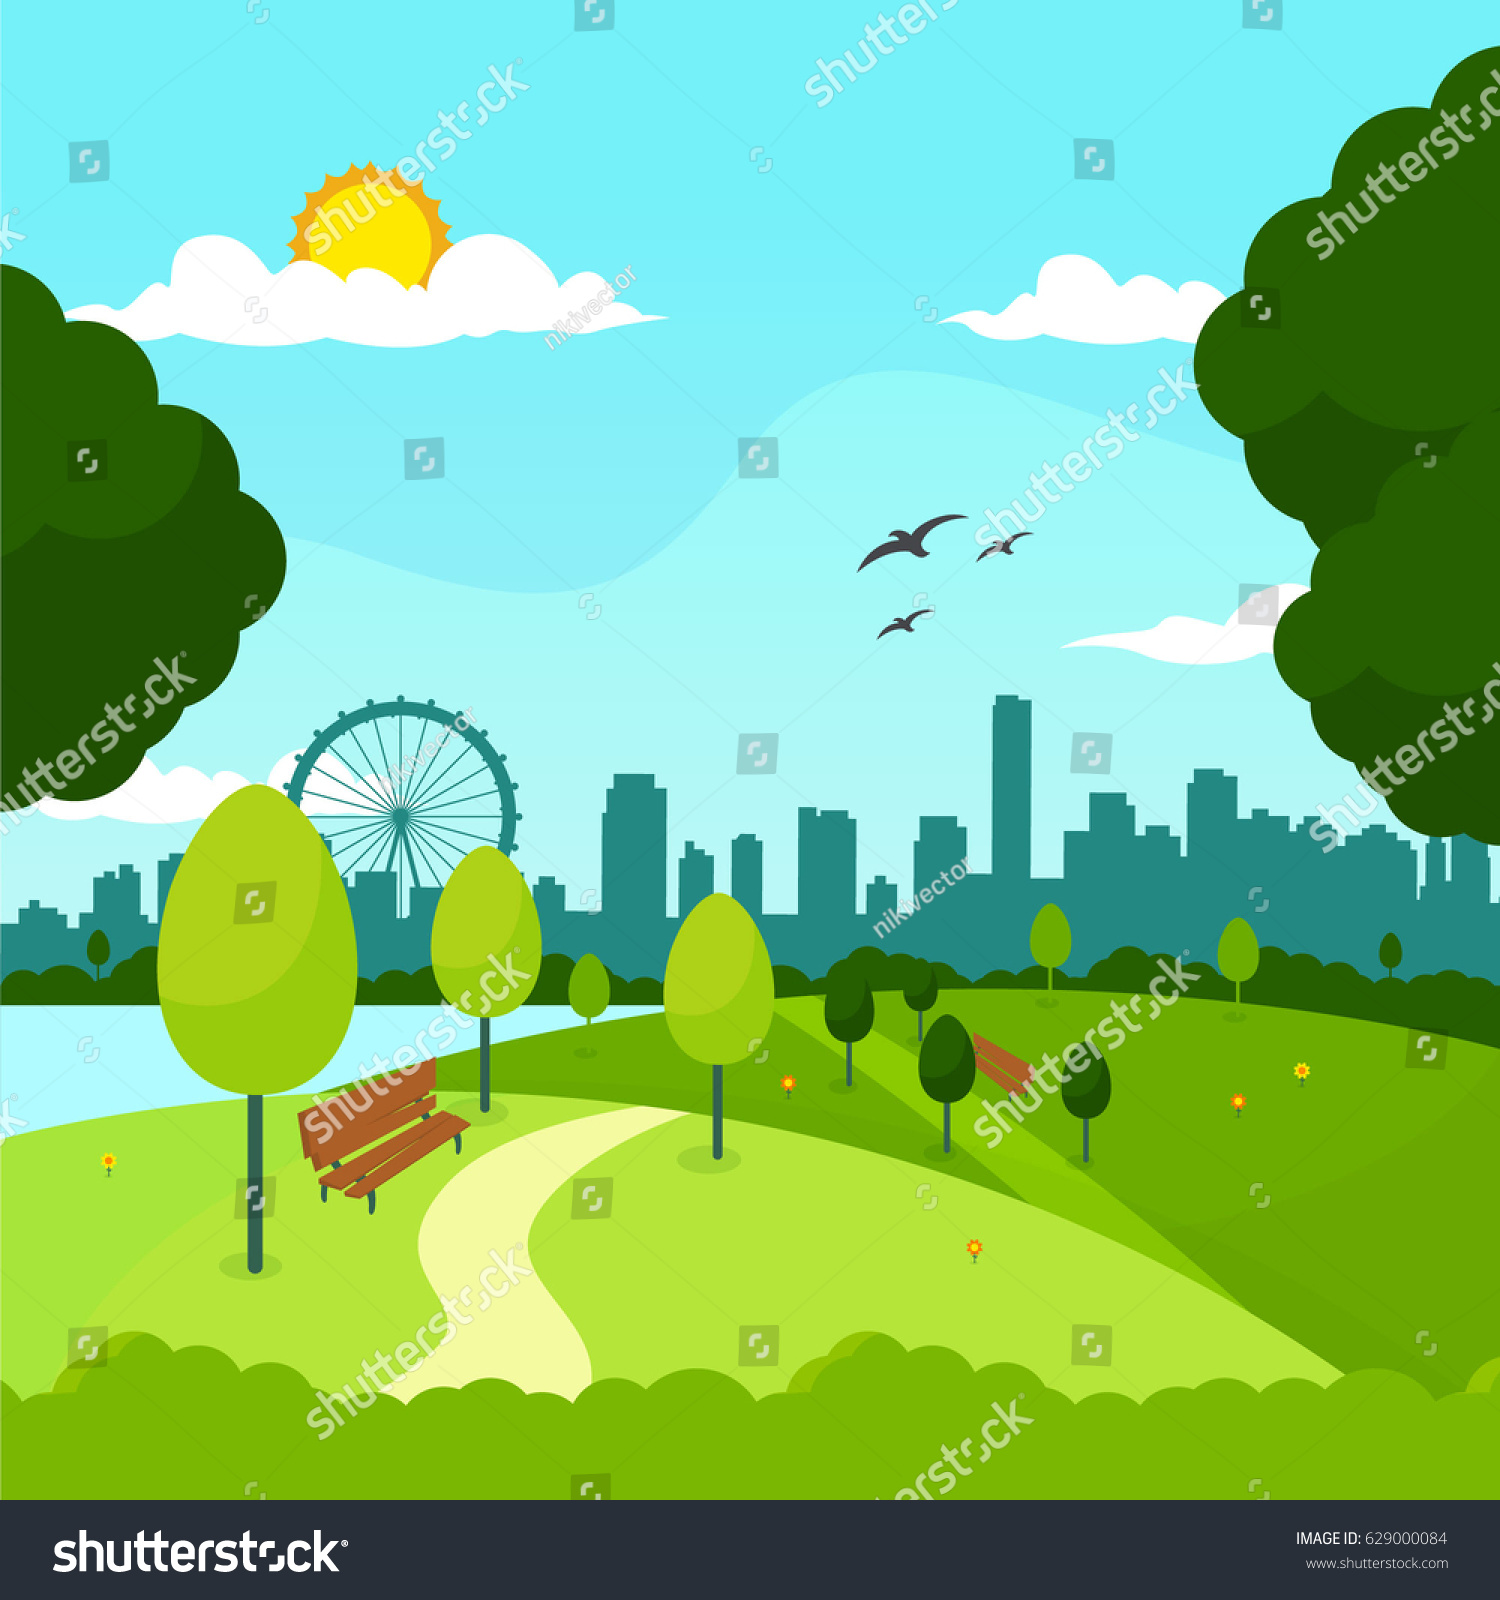 City Park Vector Nature Landscape Stock Vector (Royalty Free) 629000084